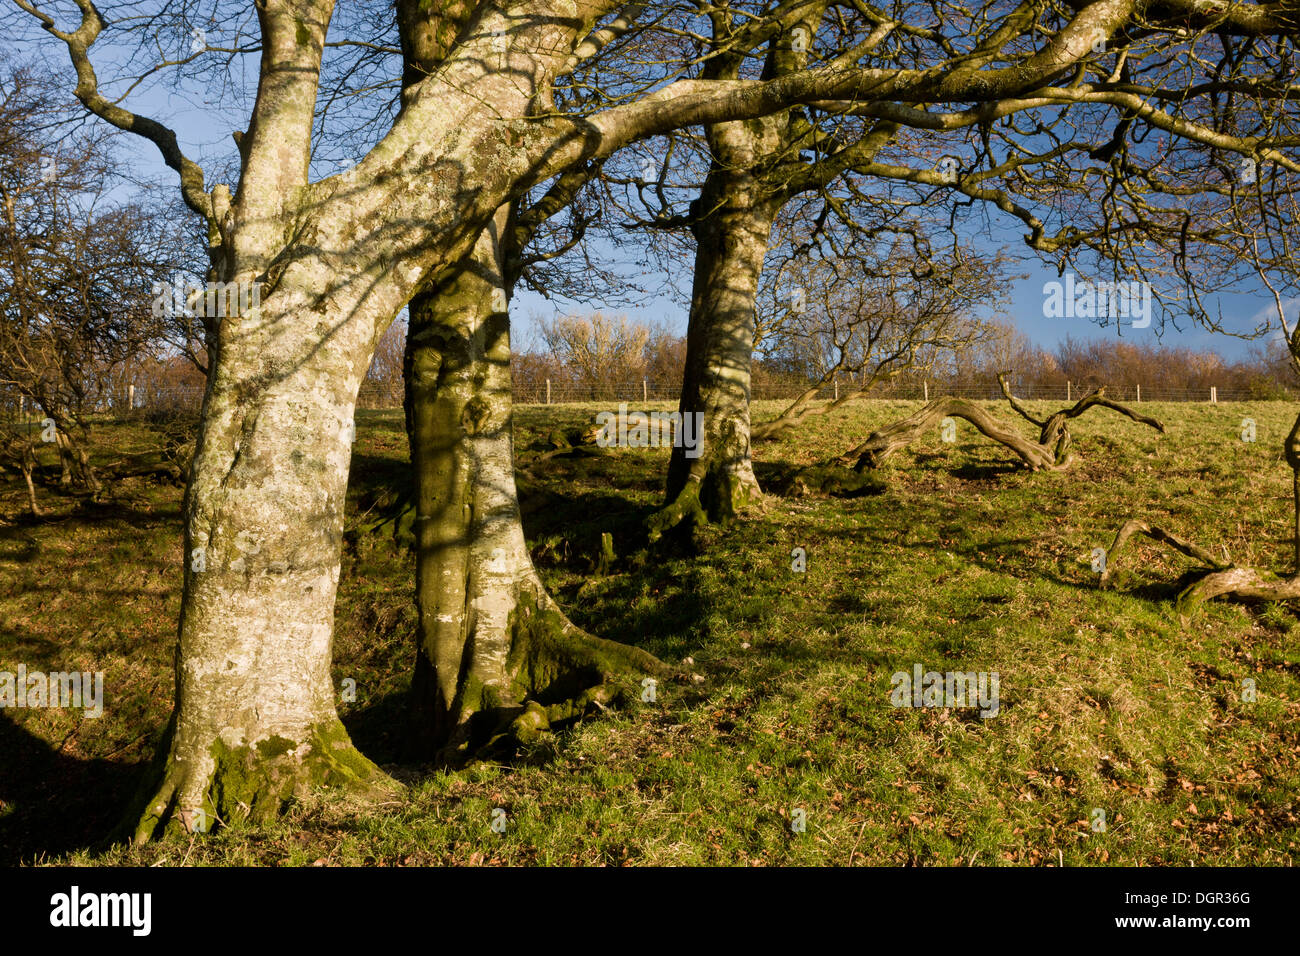 Beeches around old chalkpit at Kingcombe, West Dorset. Stock Photo